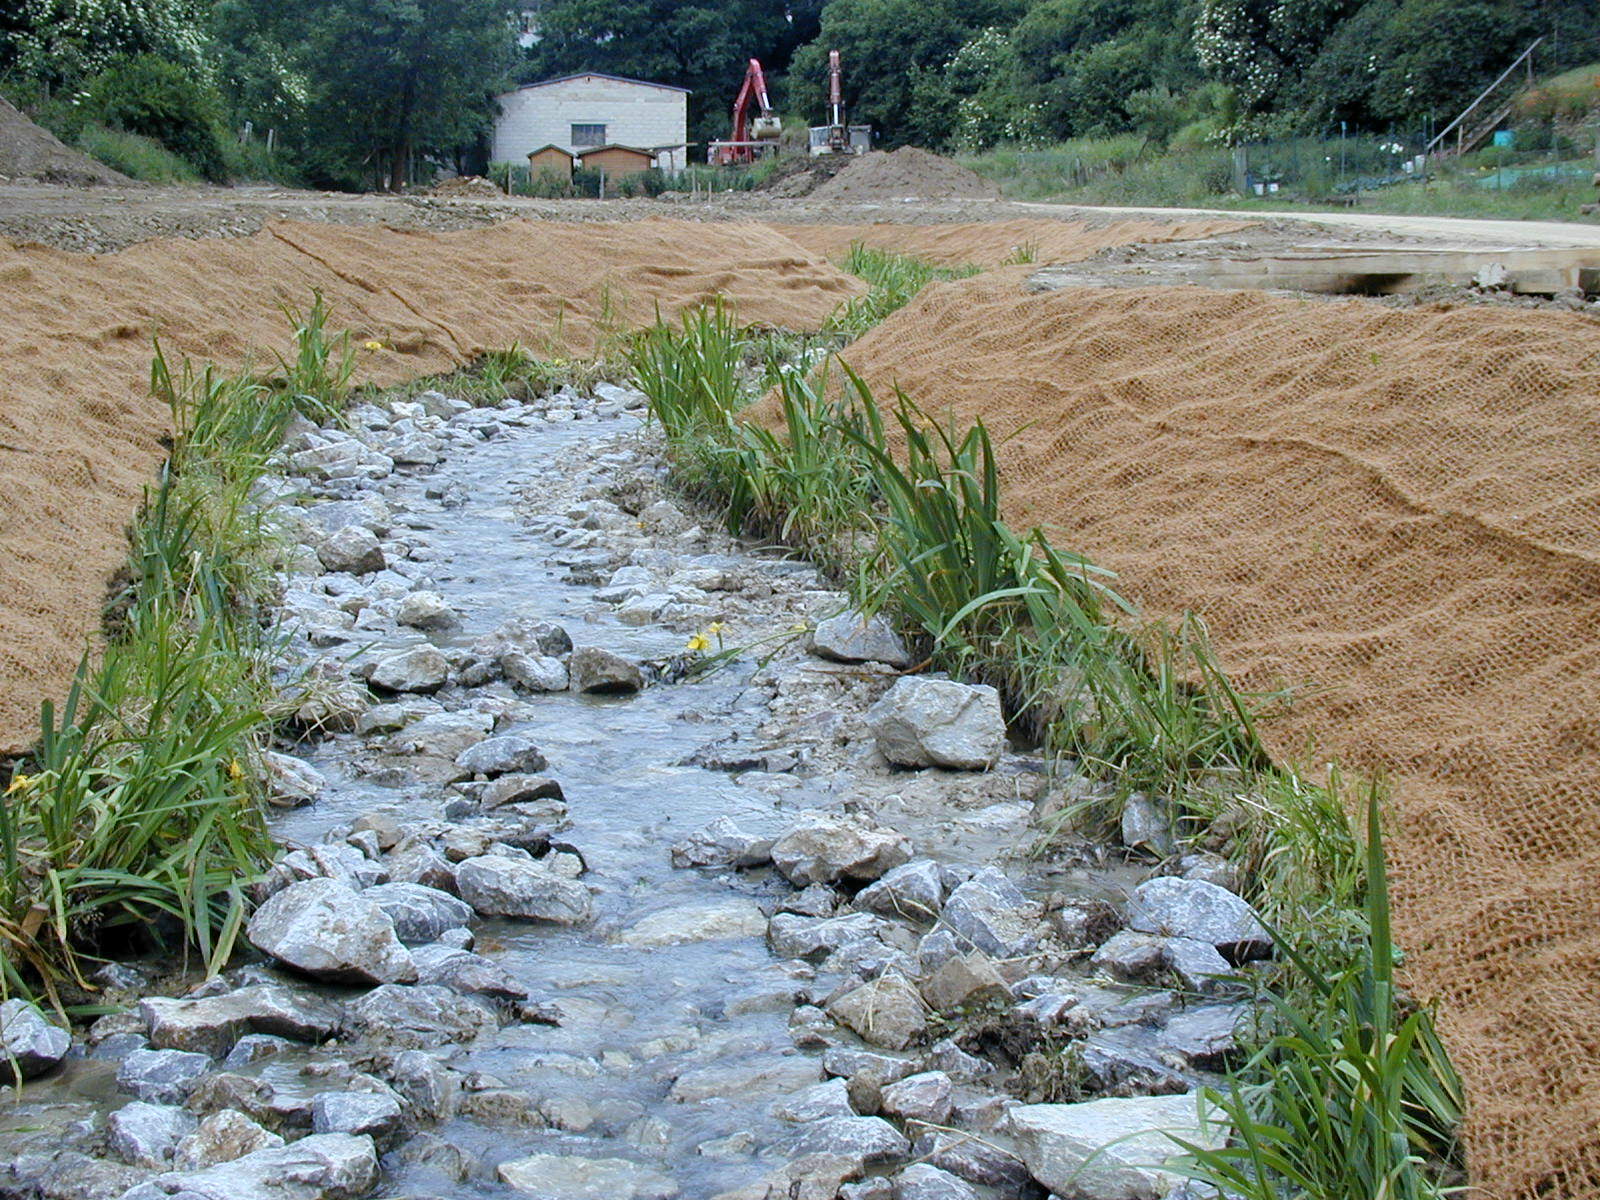 Other erosion prevention